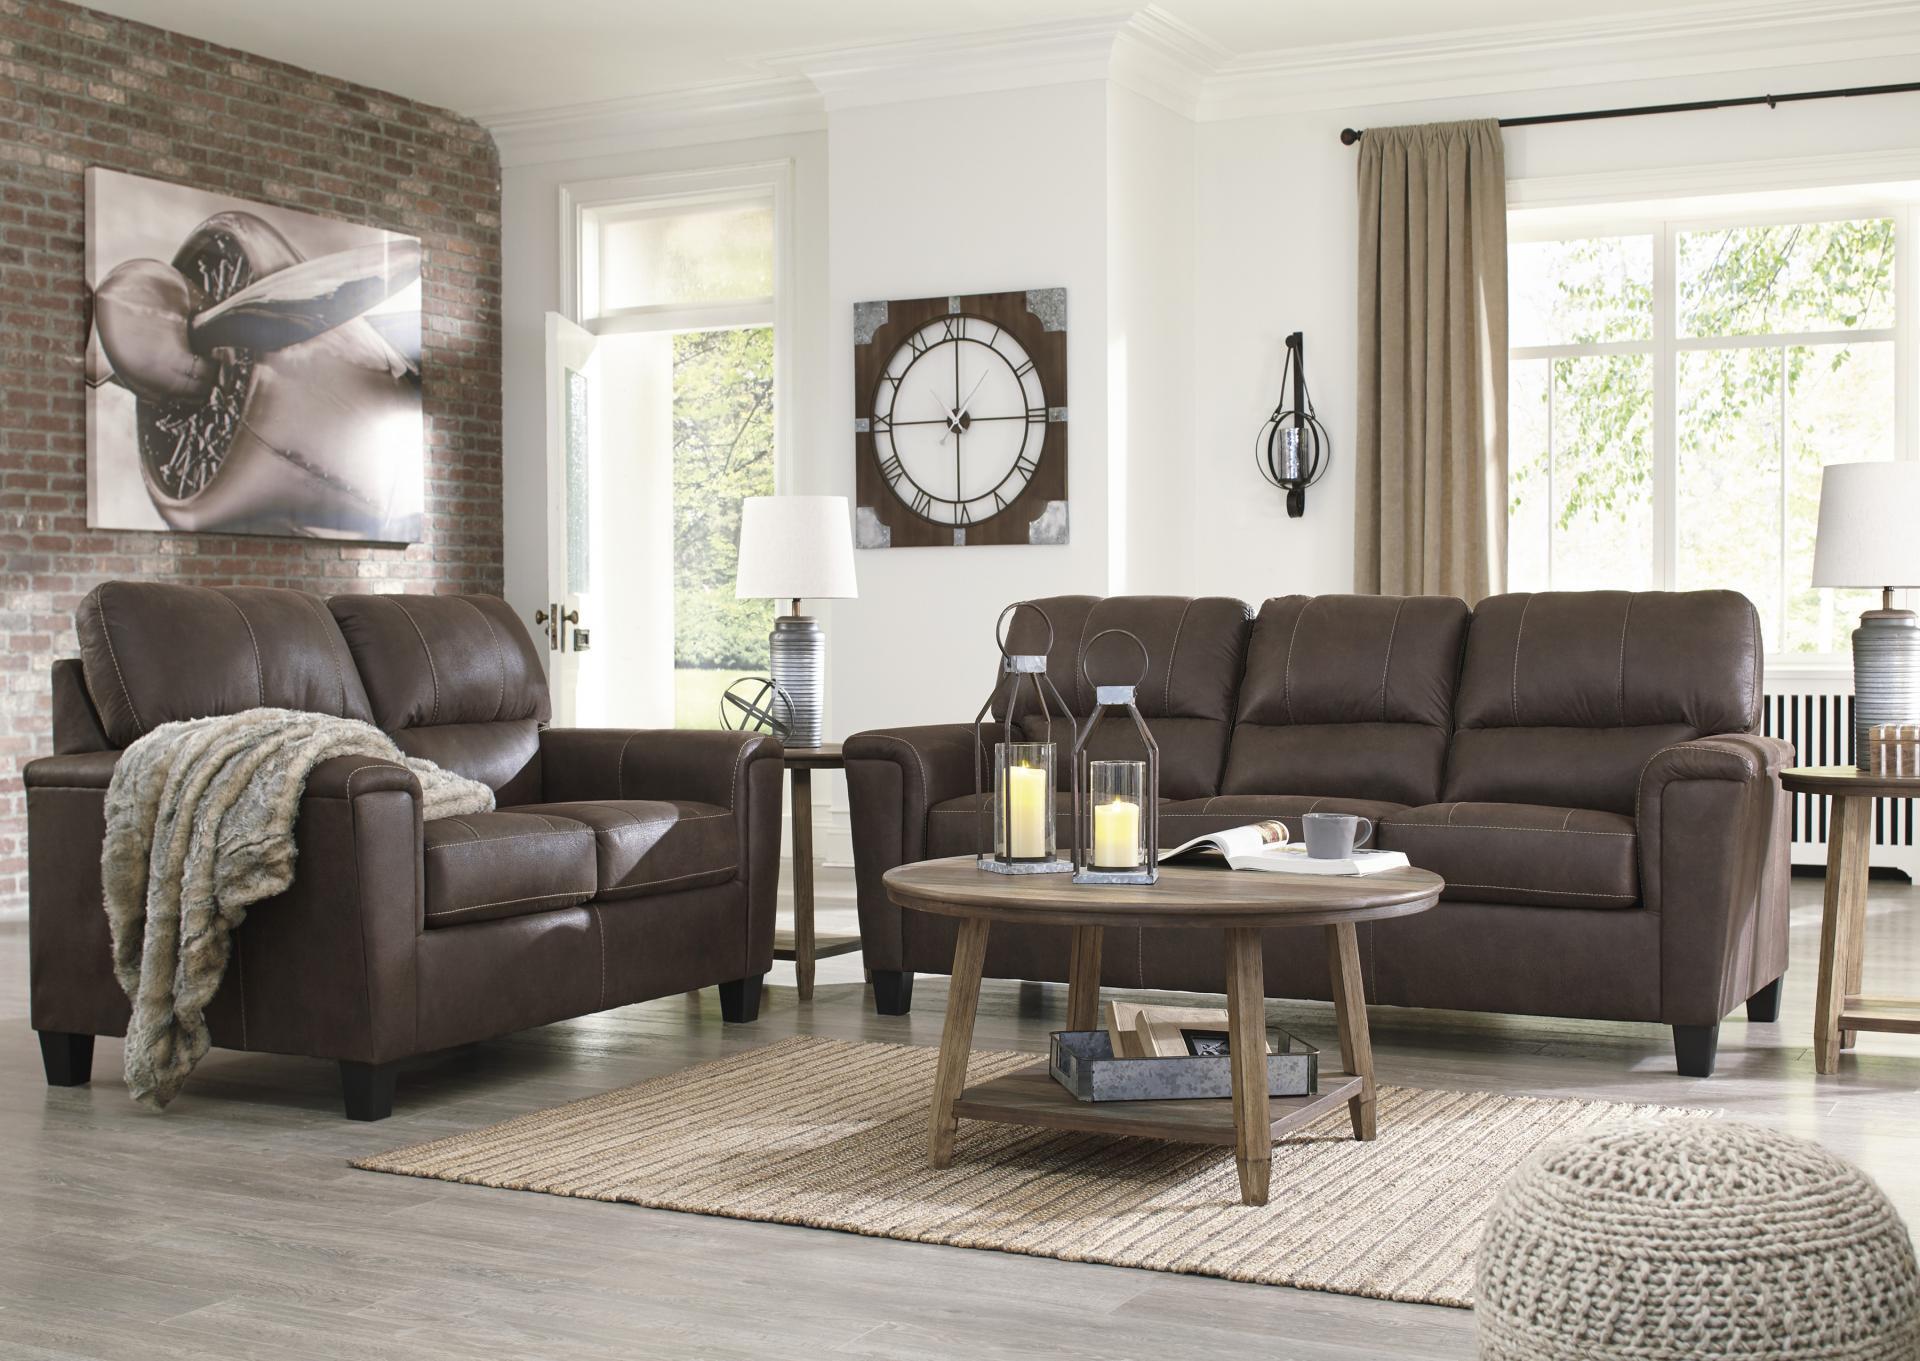 Navi Sofa & Loveseat + FREE 3PC Tables, Lamps & Rug,Price Drop Event 2023